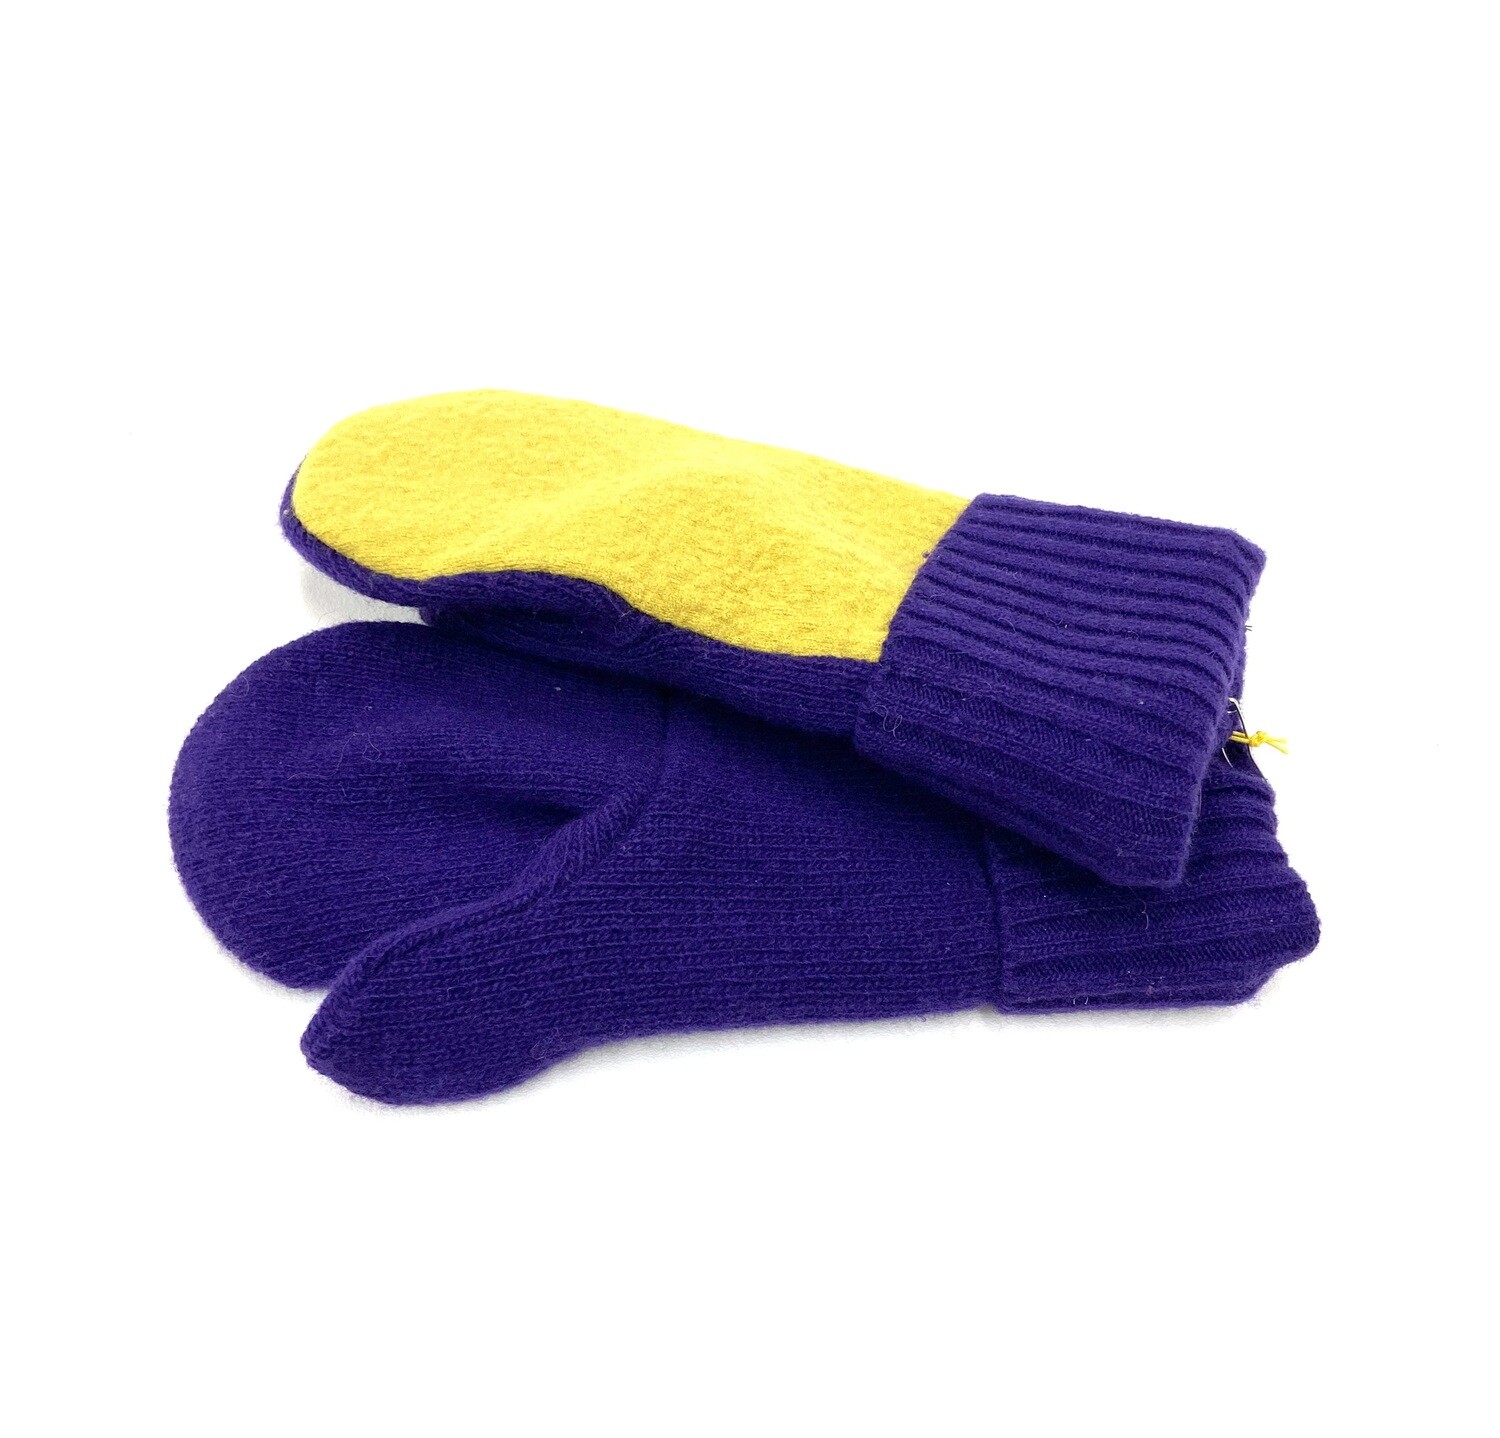 Small Neon Yellow and Purple- Mary's Mittens